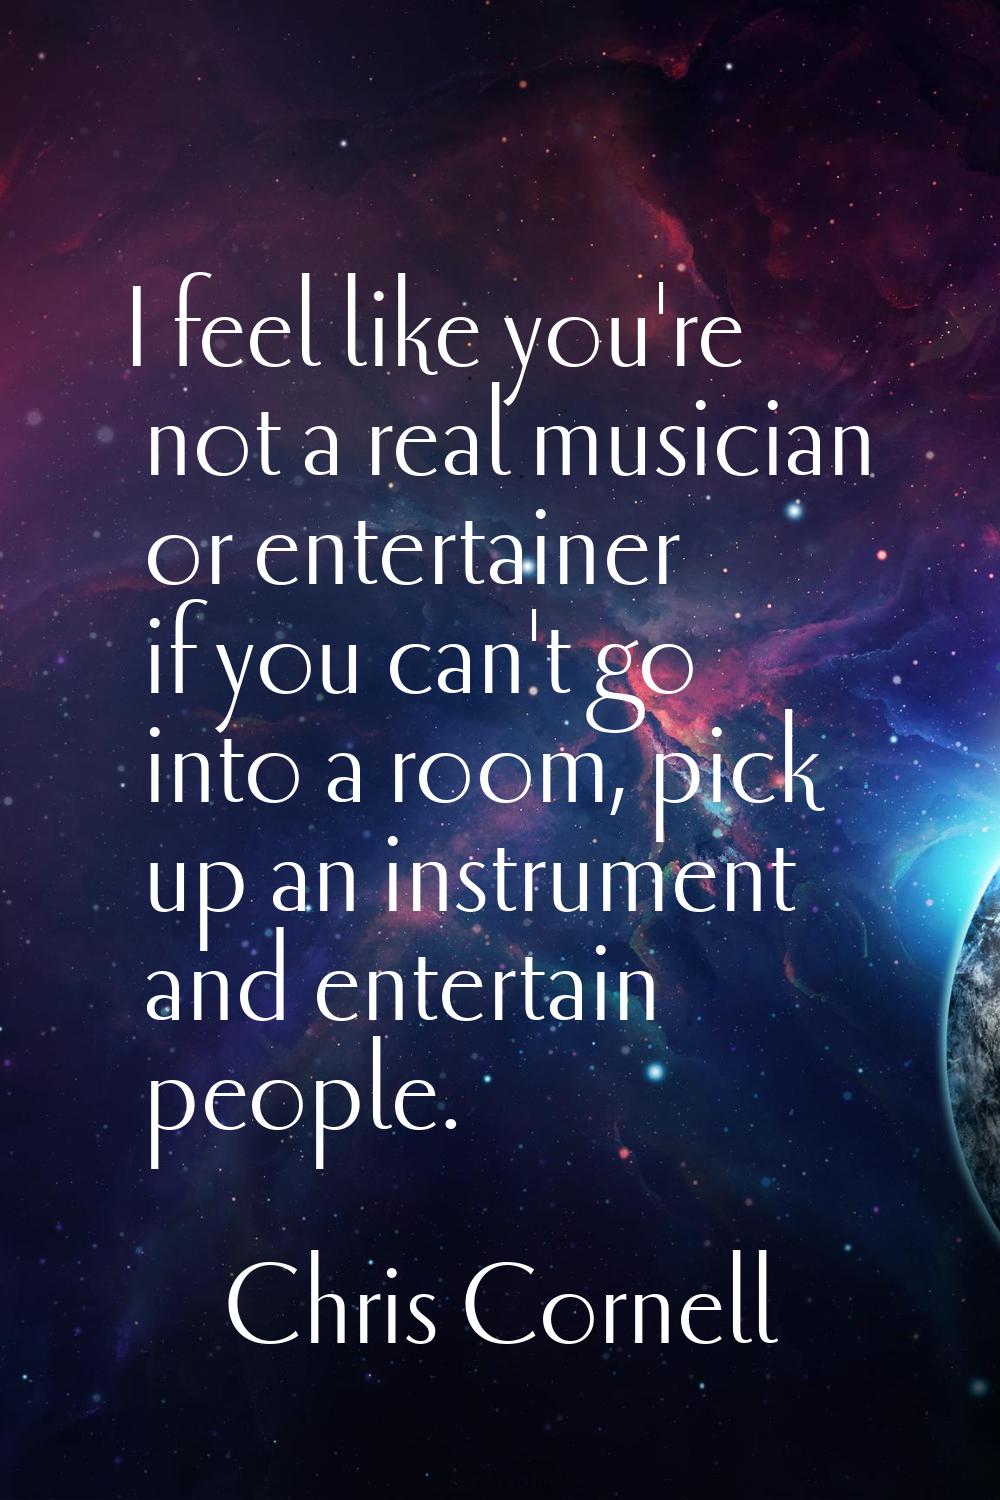 I feel like you're not a real musician or entertainer if you can't go into a room, pick up an instr